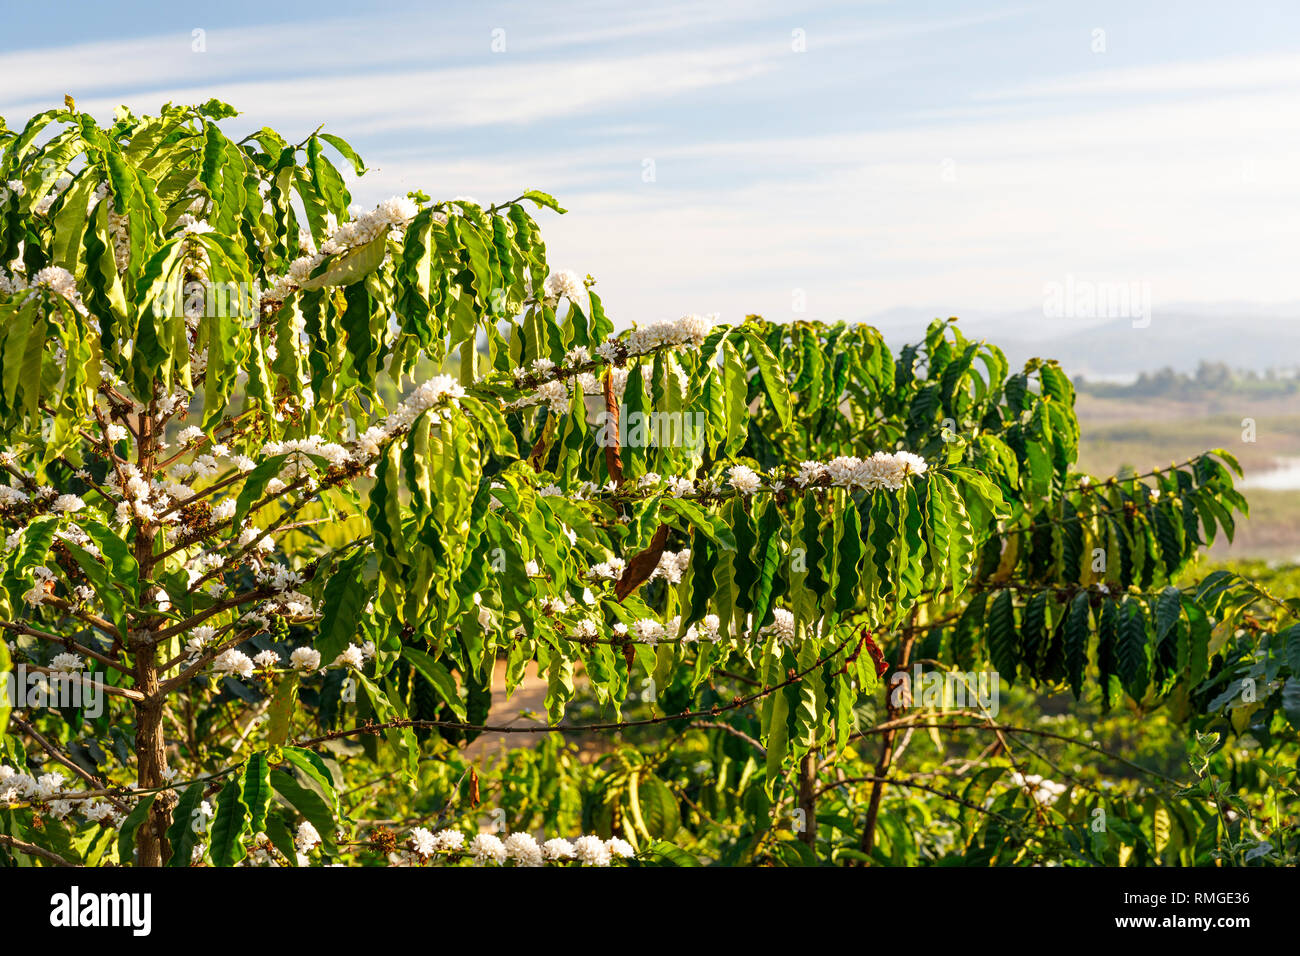 Closeup of green coffee plant leaves, blossoms and berries in Vietnam Stock Photo